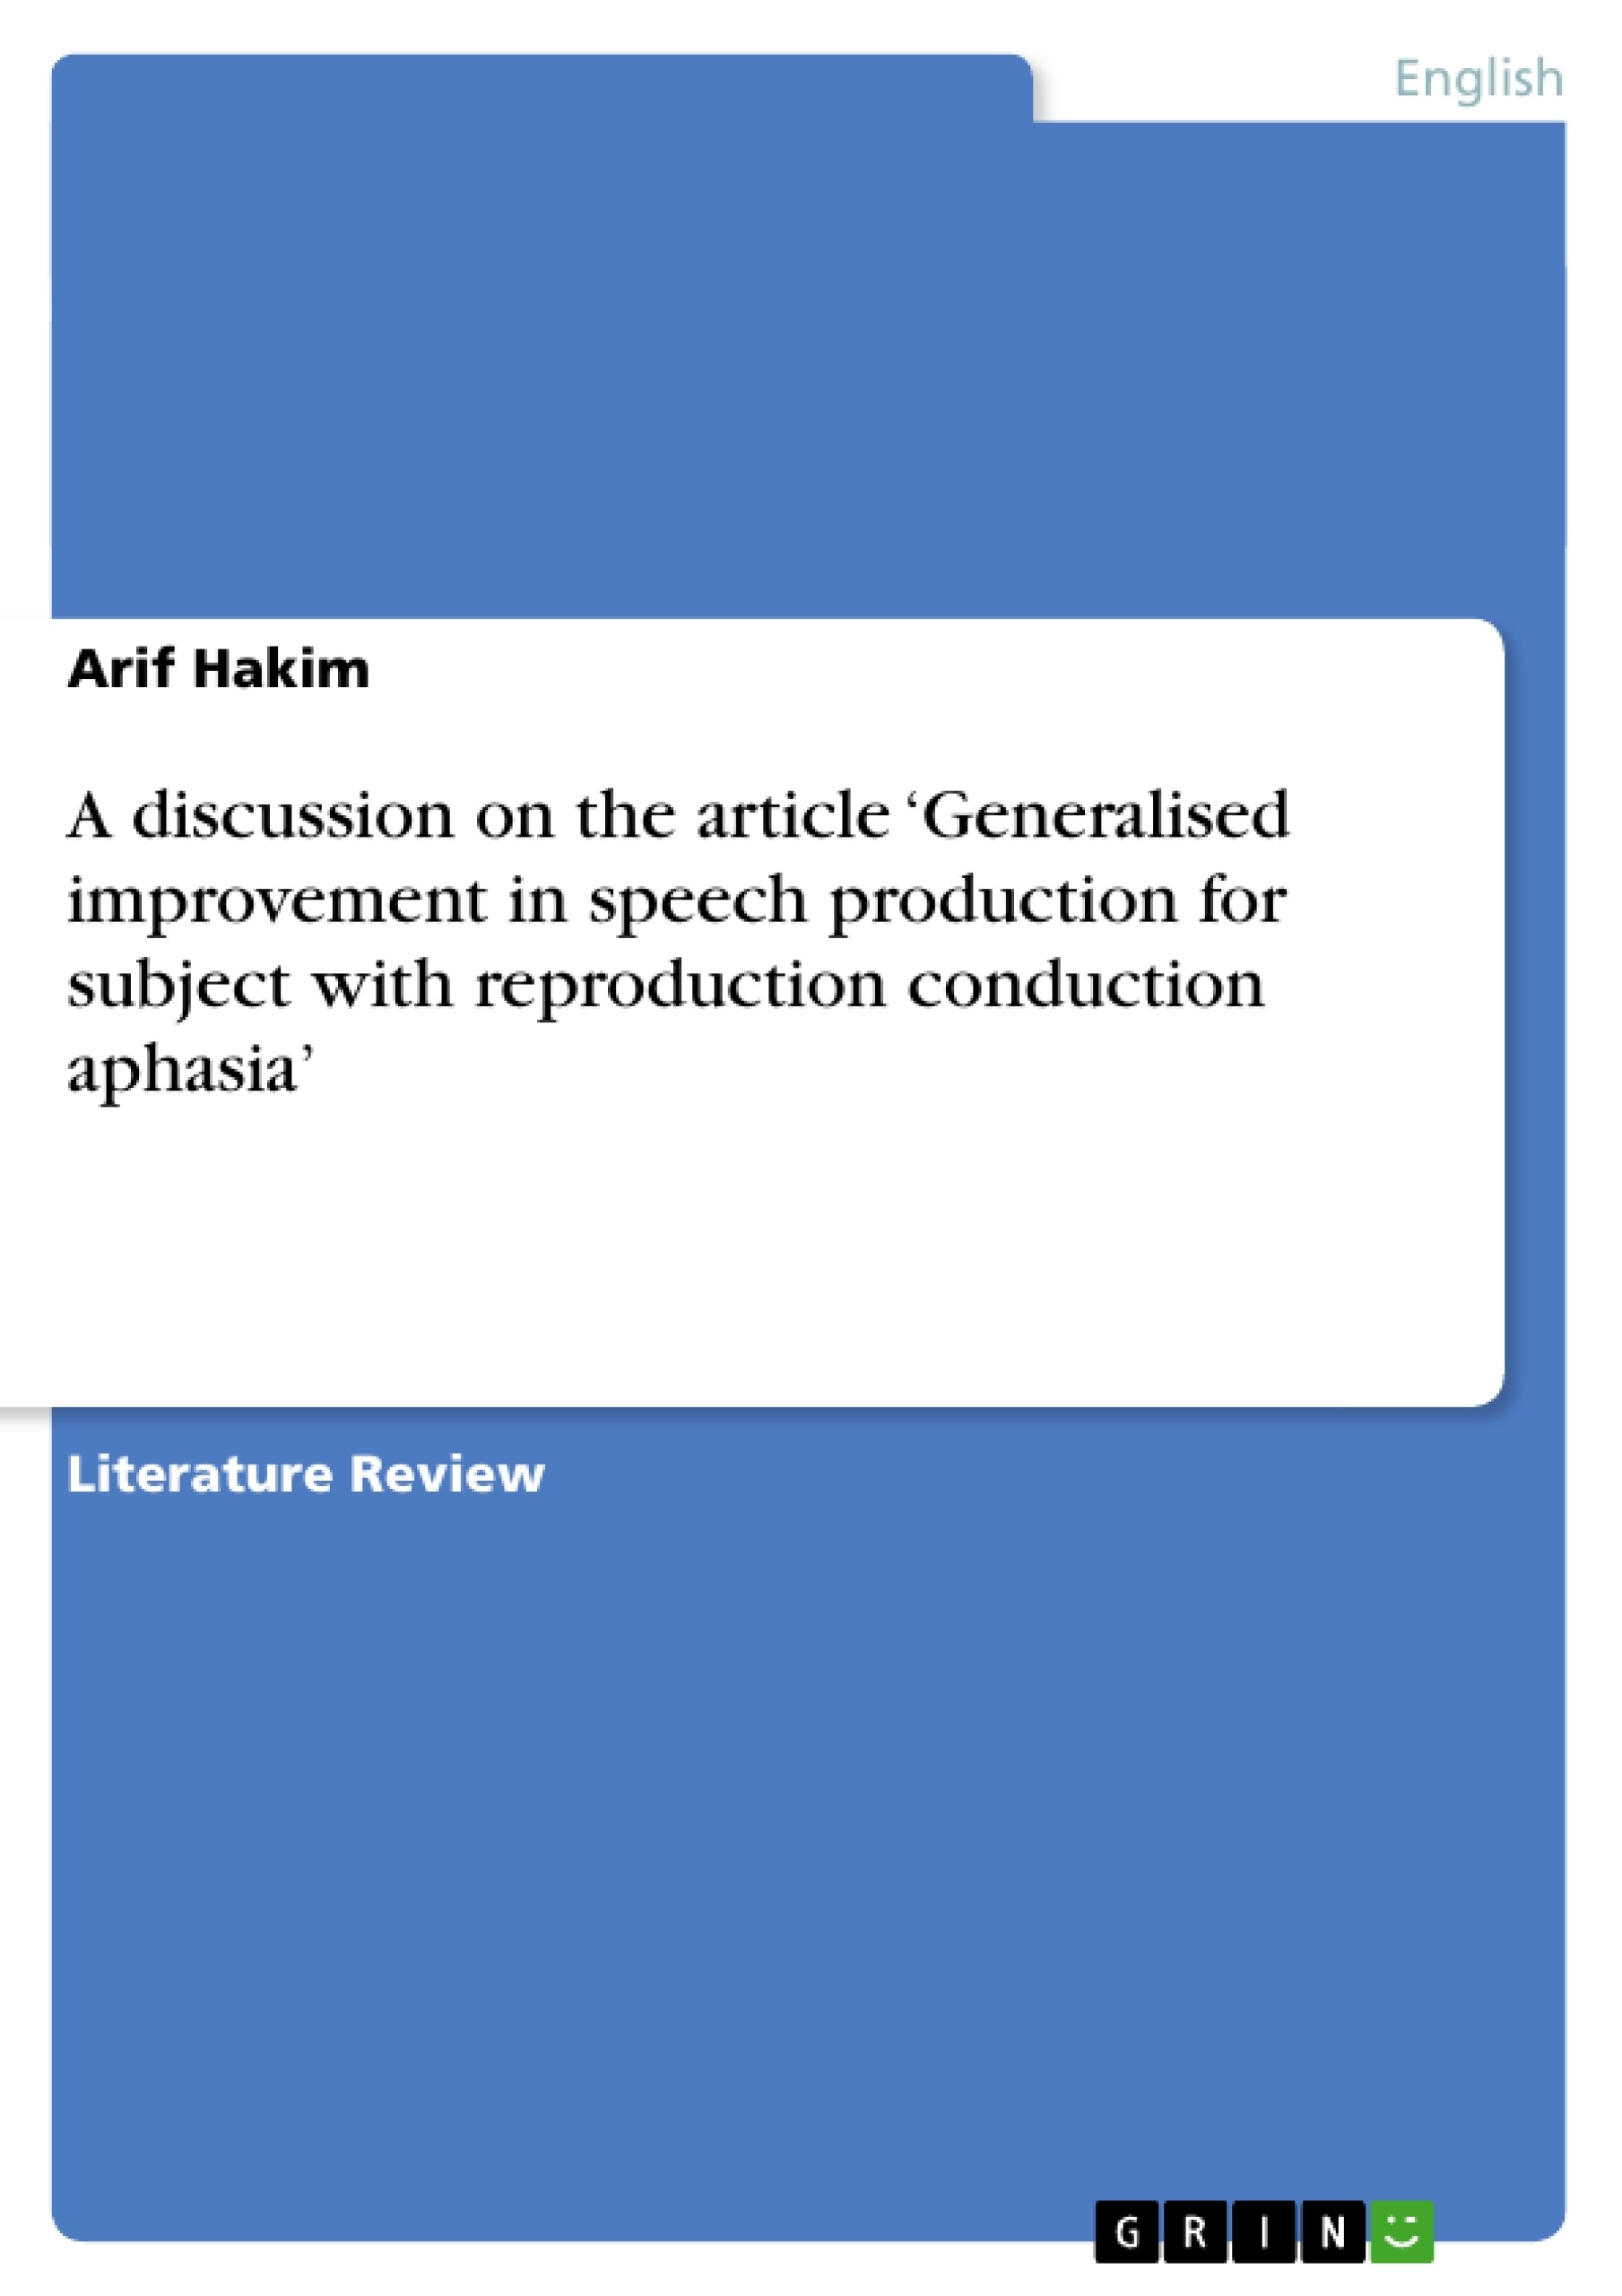 Titel: A discussion on the article ‘Generalised improvement in speech production for subject with reproduction conduction aphasia’